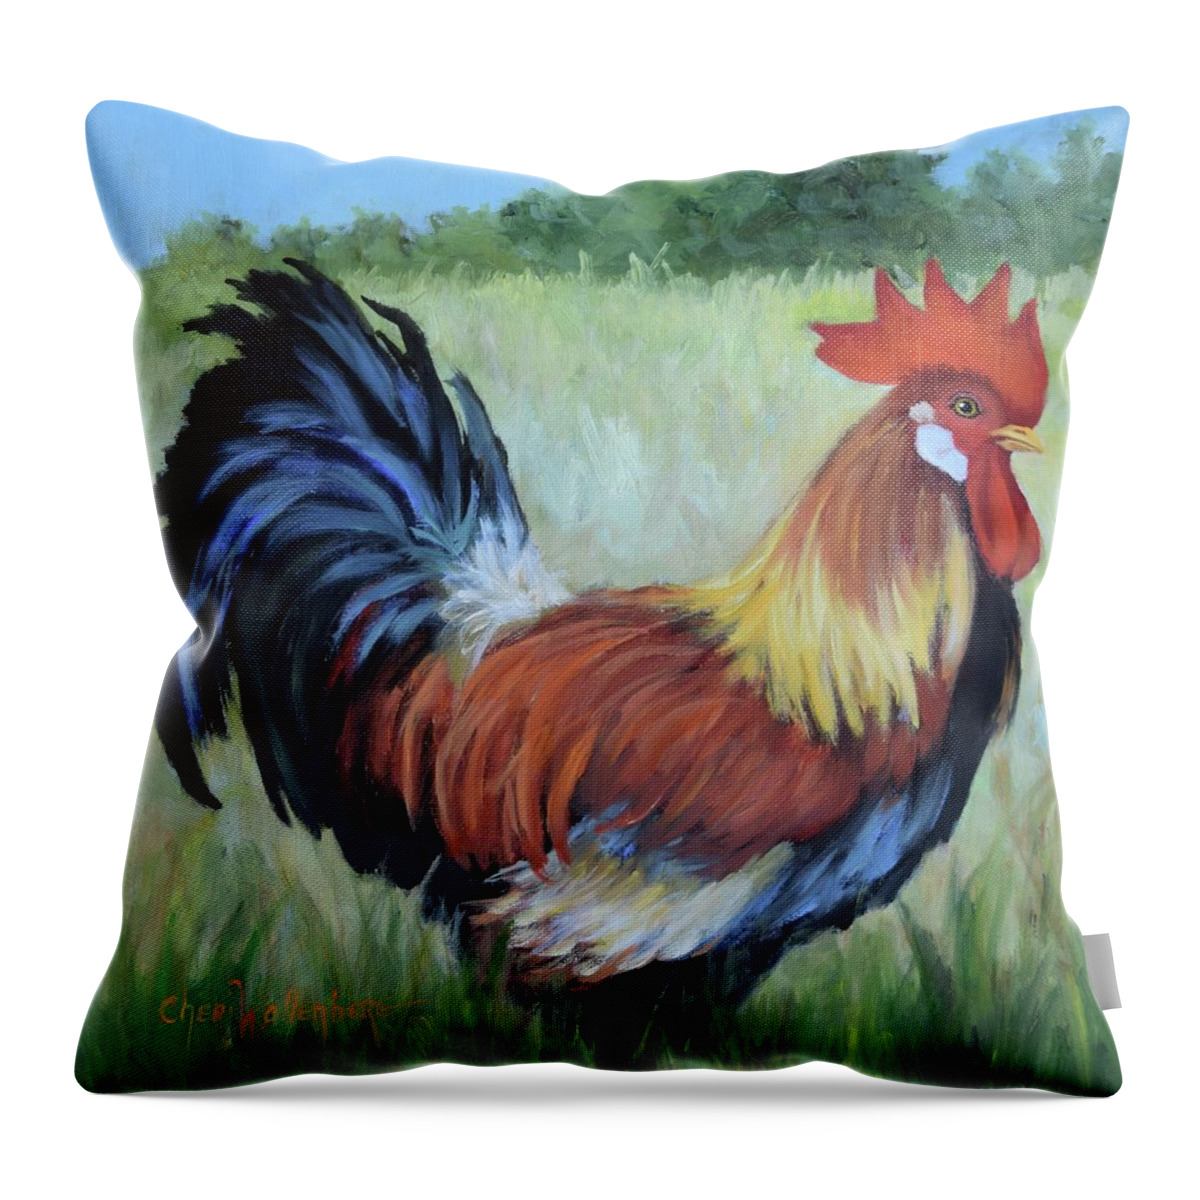 Rooster Throw Pillow featuring the painting Colorful Rooster Print by Cheri Wollenberg